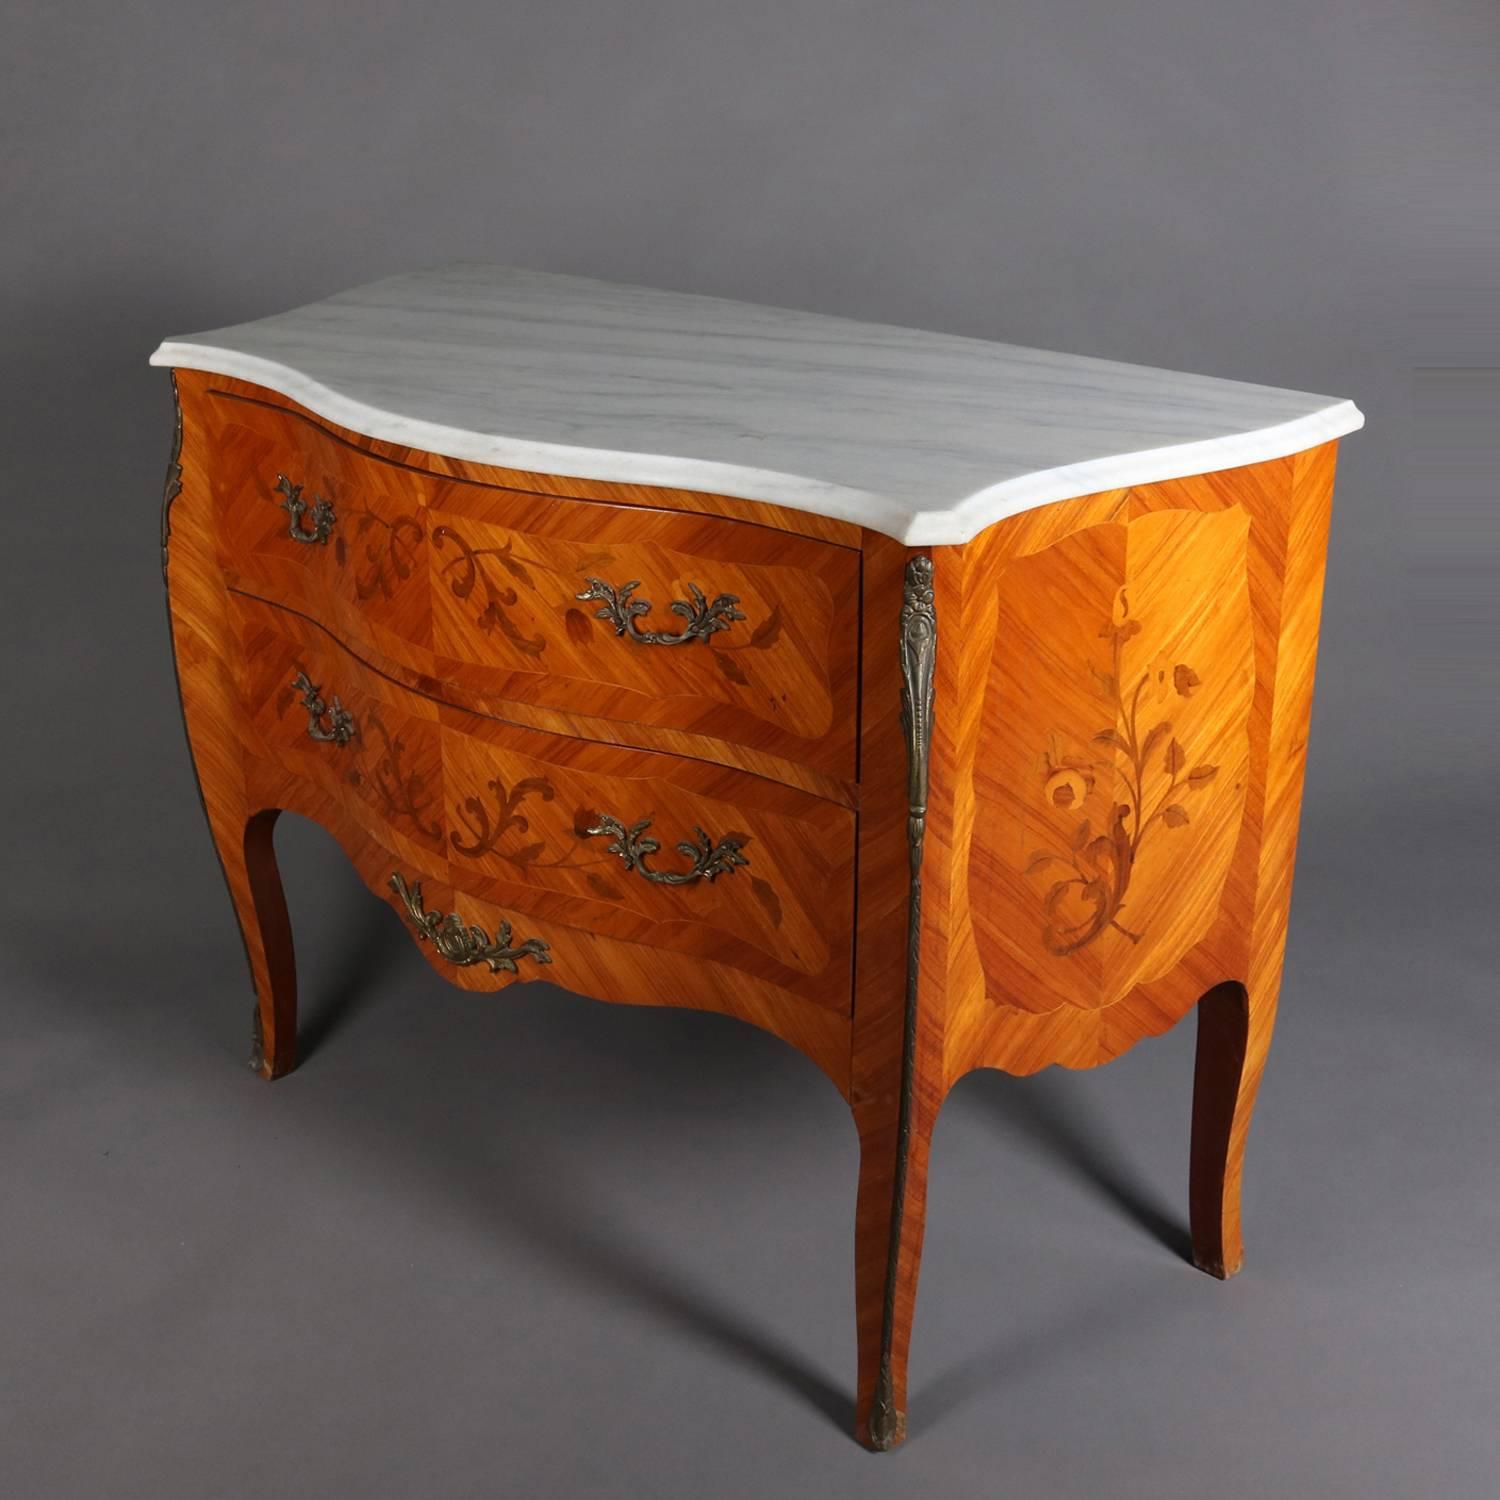 French Louis XVI style two drawer commode features bookmatched mahogany facing with floral satinwood inlaid design, foliate form cast ormolu mounts, and shaped marble top, c1900

Measures - 33